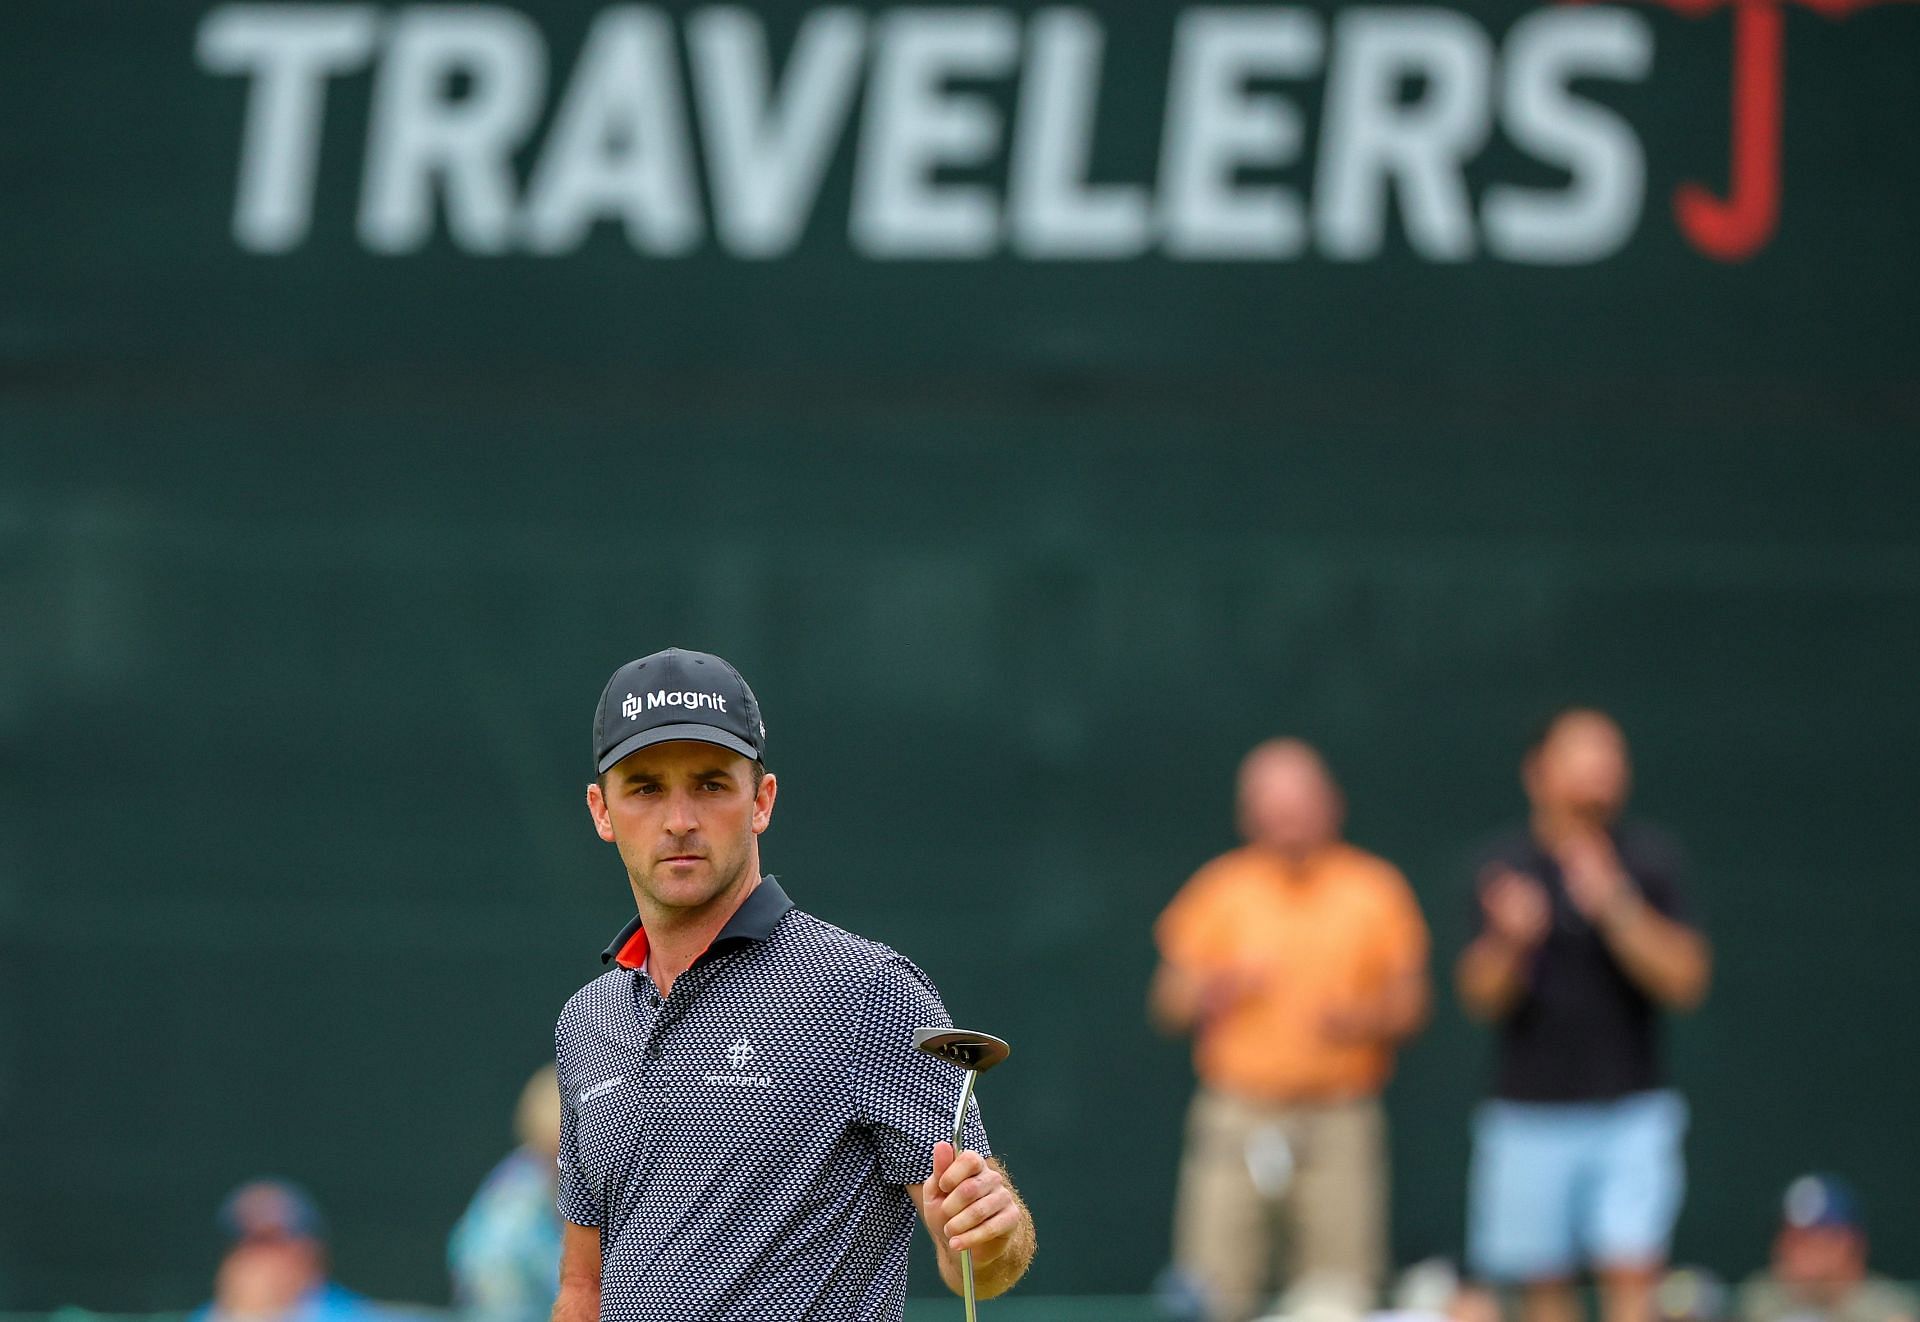 Who is leading the 2023 Travelers Championship after day 2? Leaderboard